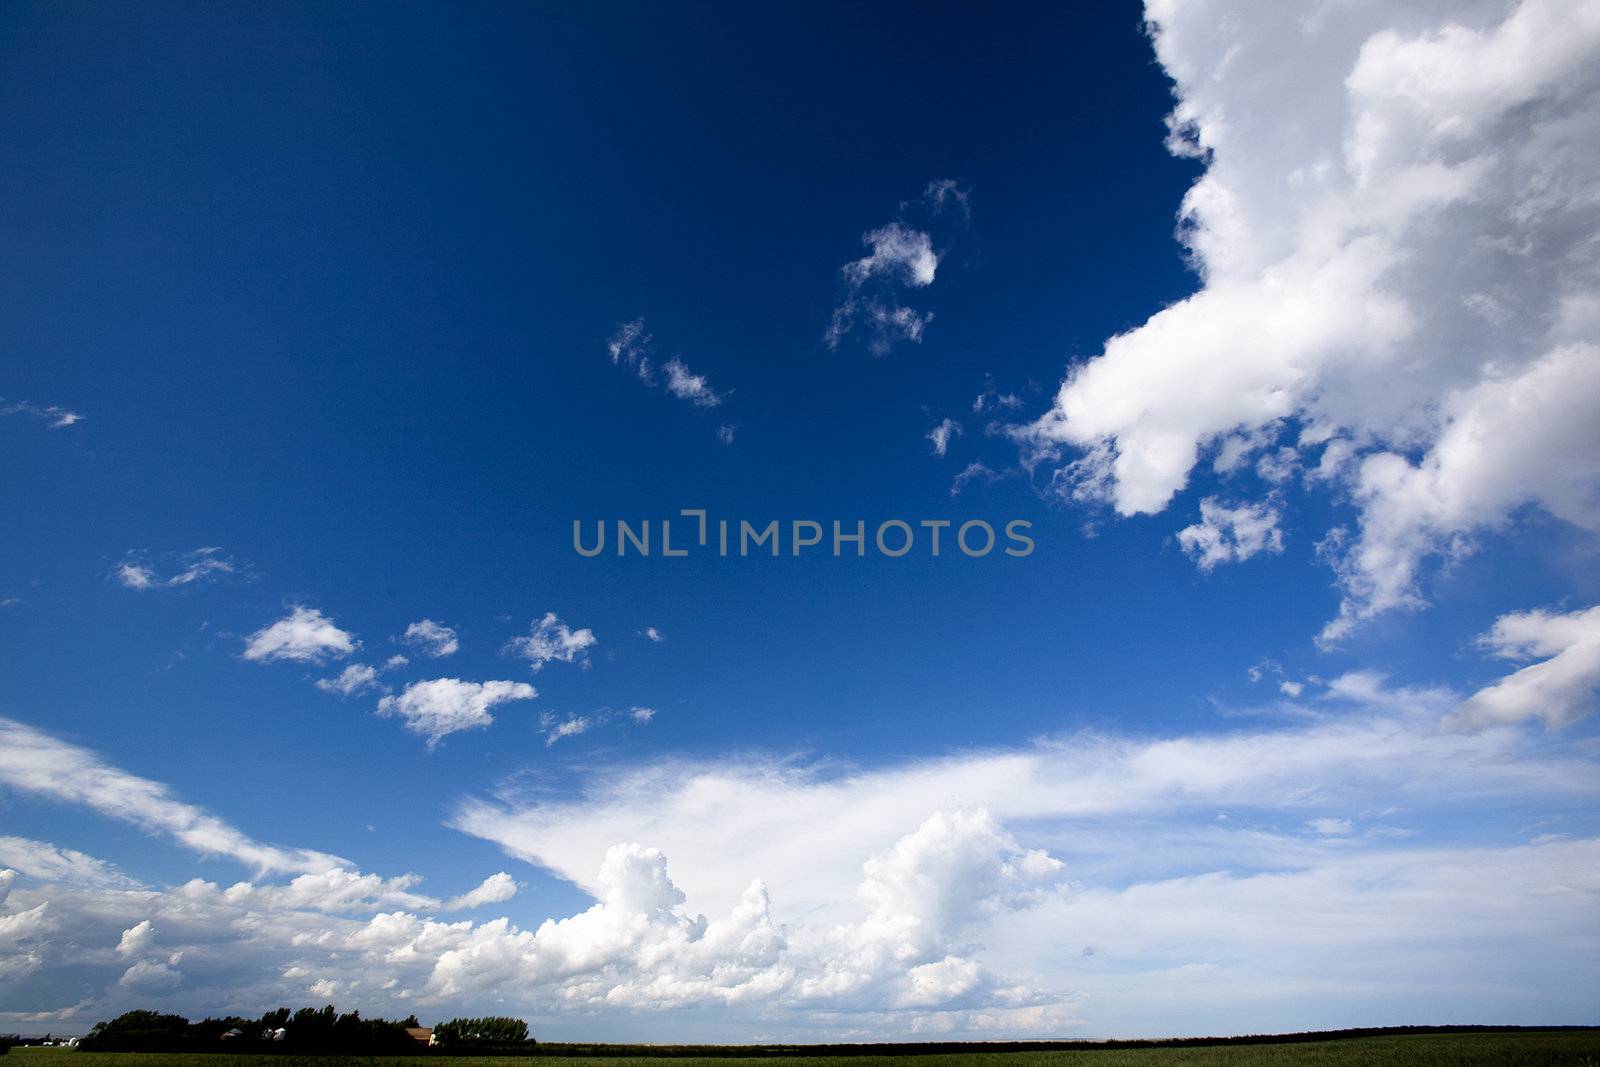 A landscape with a big sky with clouds